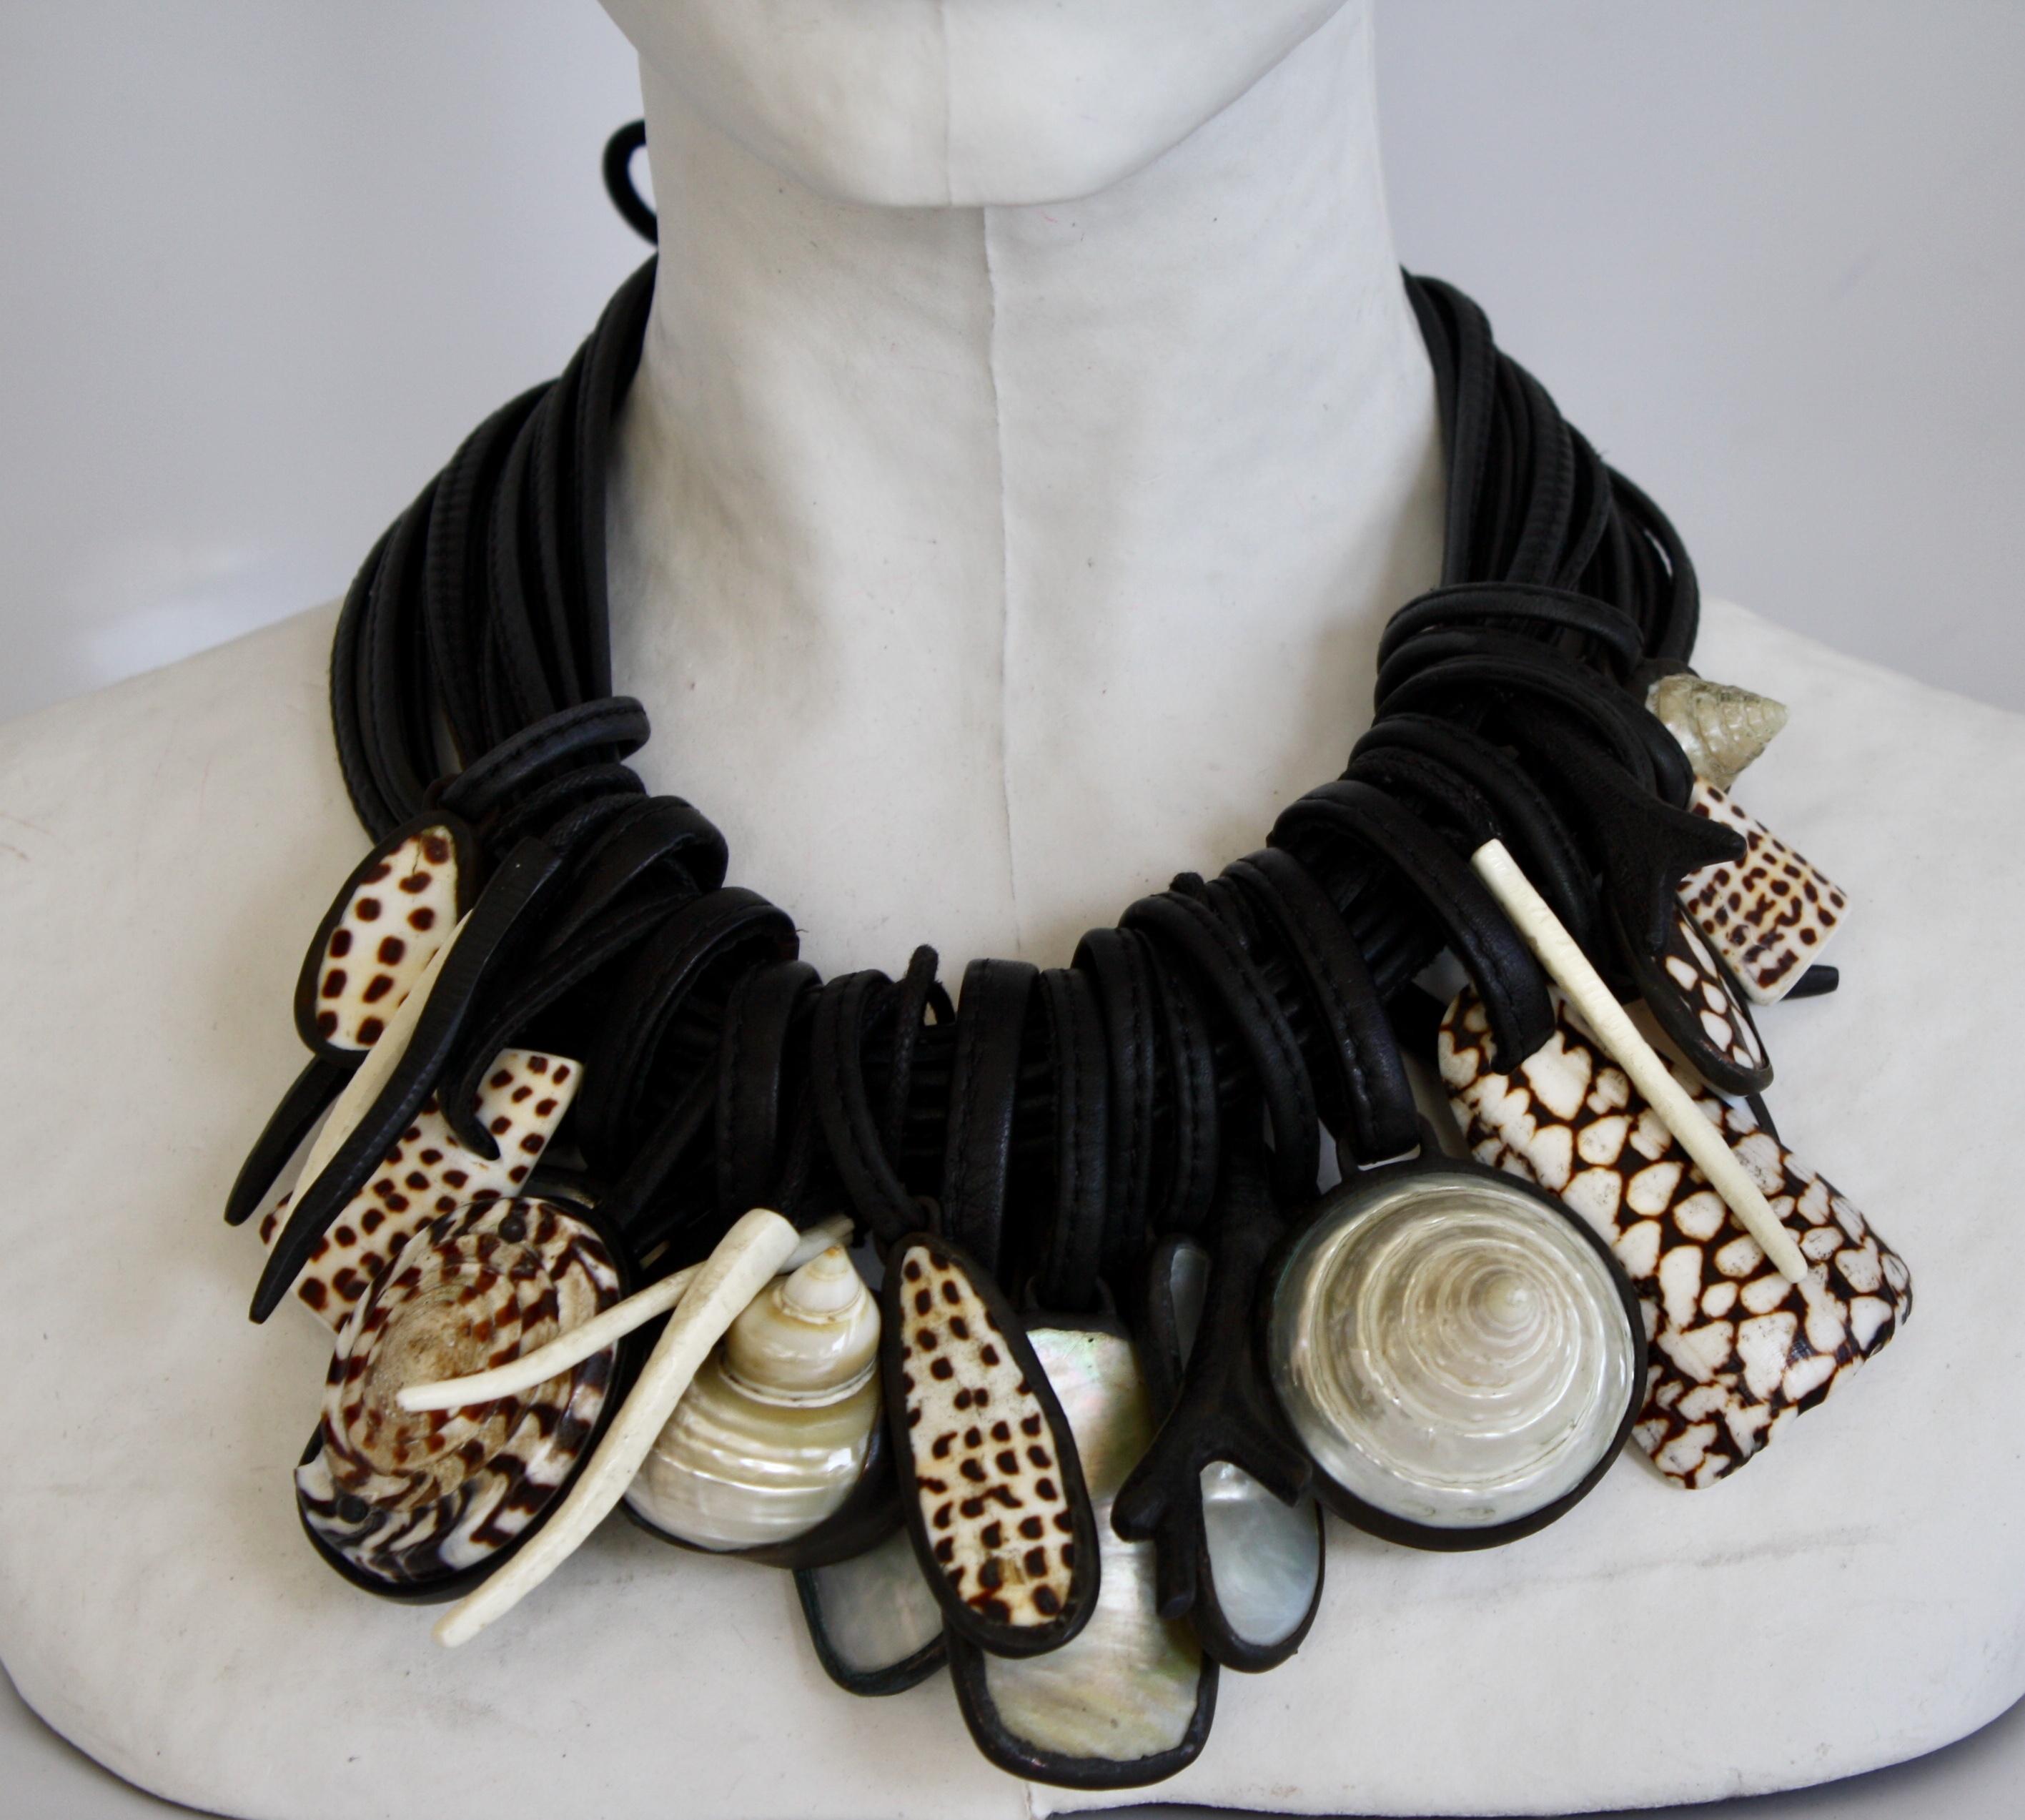 Shell, mother of pearl, rock crystal, and ebony multi pendant necklace on 11 strands of leather from Monies Denmark. 